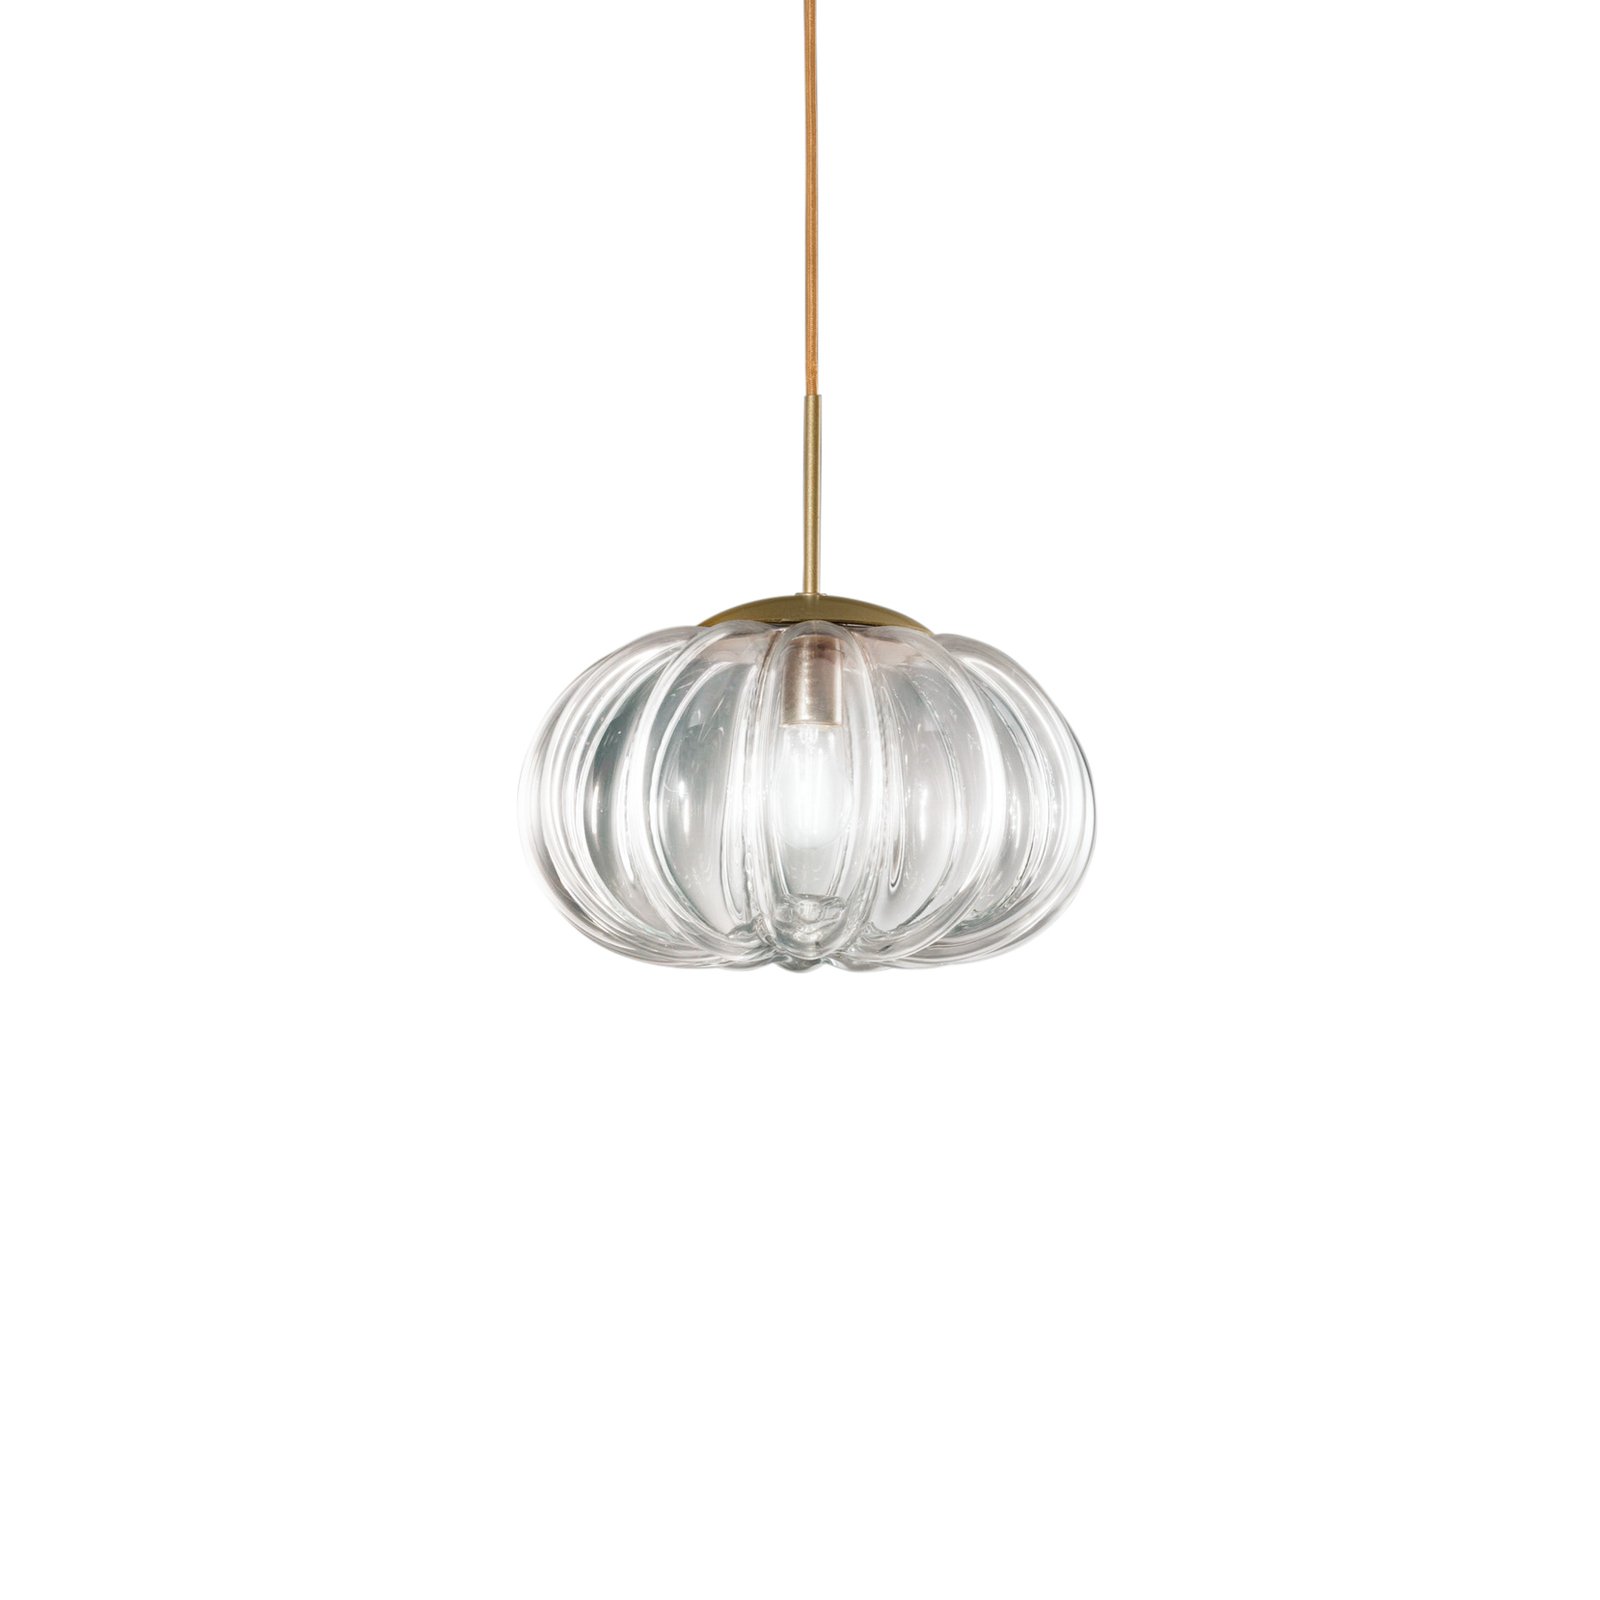 Sugar pendant light with glass shade, clear